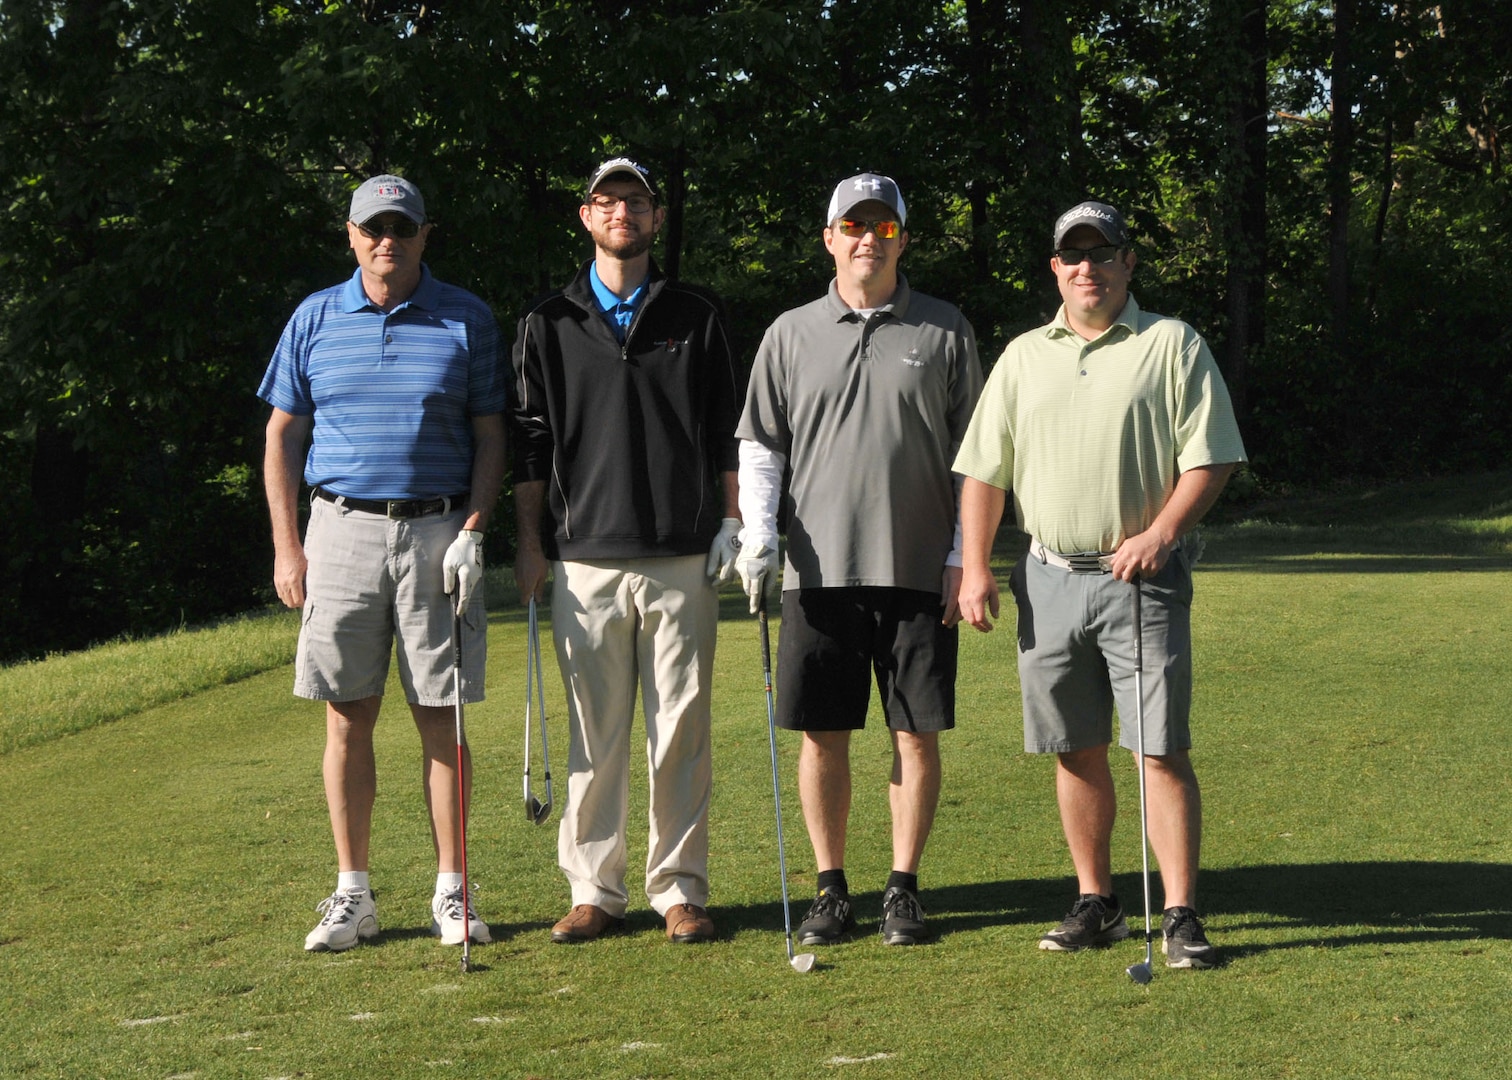 The winning team, from left: Dave Peterson, direct delivery fuels director, DLA Energy; Bruce Blank, supervisory procurement analyst, DLA Energy; Cliff Sands, supervisory general engineer, DLA Installation Support; Justin Wingo, contract specialist, DLA Energy
